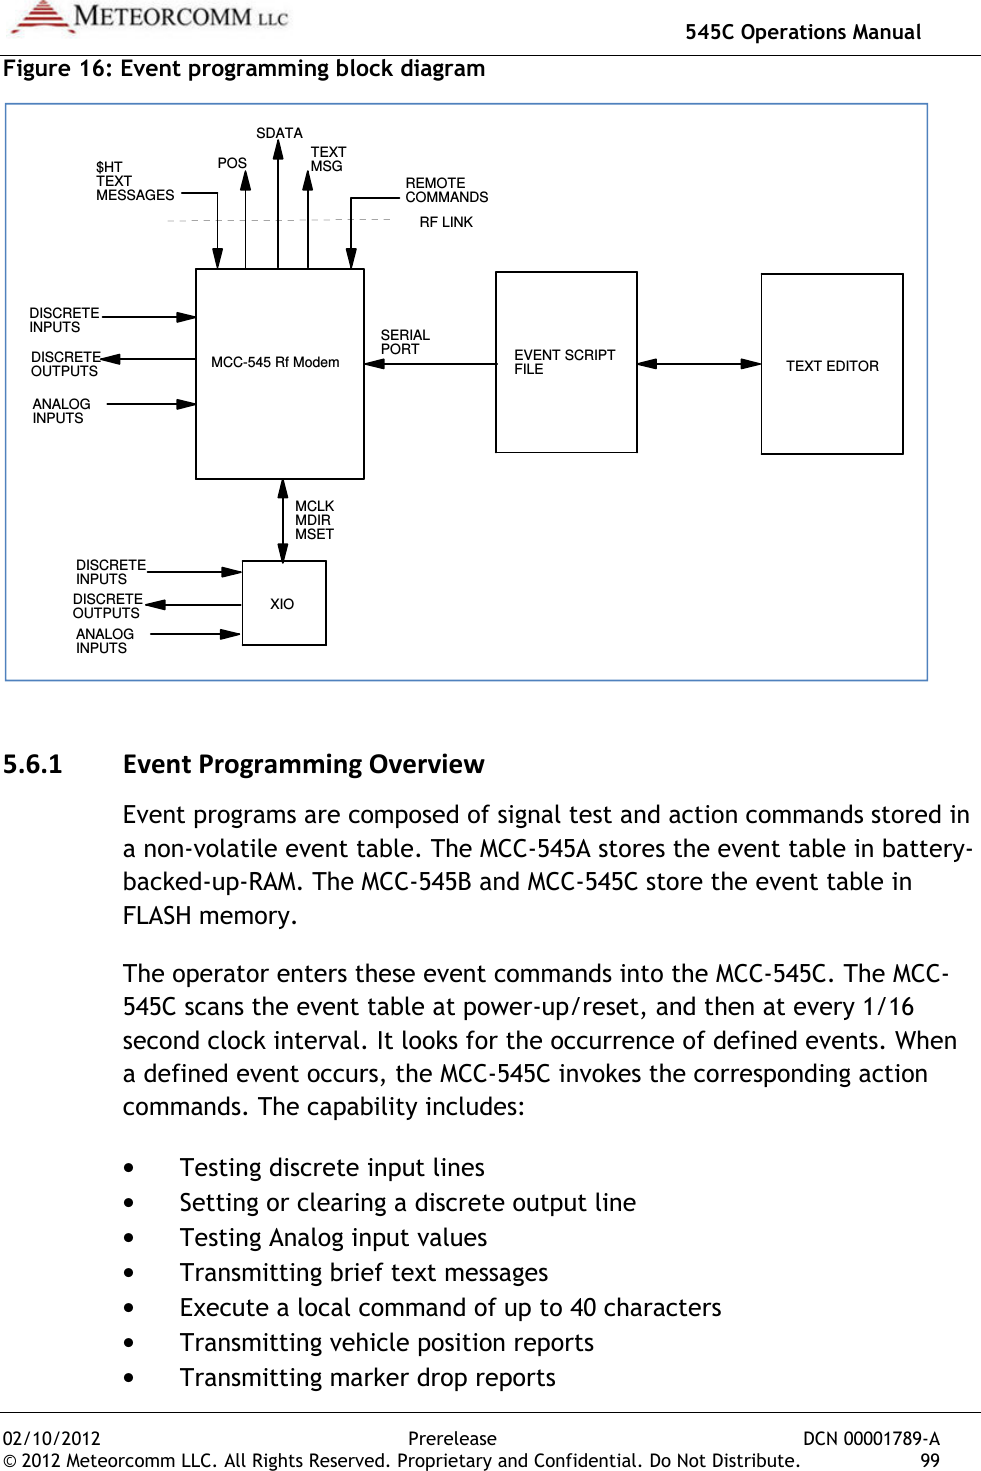   545C Operations Manual 02/10/2012  Prerelease  DCN 00001789-A © 2012 Meteorcomm LLC. All Rights Reserved. Proprietary and Confidential. Do Not Distribute.  99 Figure 16: Event programming block diagram  5.6.1 Event Programming Overview Event programs are composed of signal test and action commands stored in a non-volatile event table. The MCC-545A stores the event table in battery-backed-up-RAM. The MCC-545B and MCC-545C store the event table in FLASH memory. The operator enters these event commands into the MCC-545C. The MCC-545C scans the event table at power-up/reset, and then at every 1/16 second clock interval. It looks for the occurrence of defined events. When a defined event occurs, the MCC-545C invokes the corresponding action commands. The capability includes: • Testing discrete input lines • Setting or clearing a discrete output line • Testing Analog input values • Transmitting brief text messages • Execute a local command of up to 40 characters • Transmitting vehicle position reports • Transmitting marker drop reports MCC-545 Rf Modem EVENT SCRIPTFILE TEXT EDITORXIO$HTTEXTMESSAGES REMOTECOMMANDSDISCRETEINPUTSDISCRETEOUTPUTSANALOGINPUTSDISCRETEINPUTSDISCRETEOUTPUTSANALOGINPUTSRF LINKSERIALPORTMCLKMDIRMSETPOS TEXTMSGSDATA